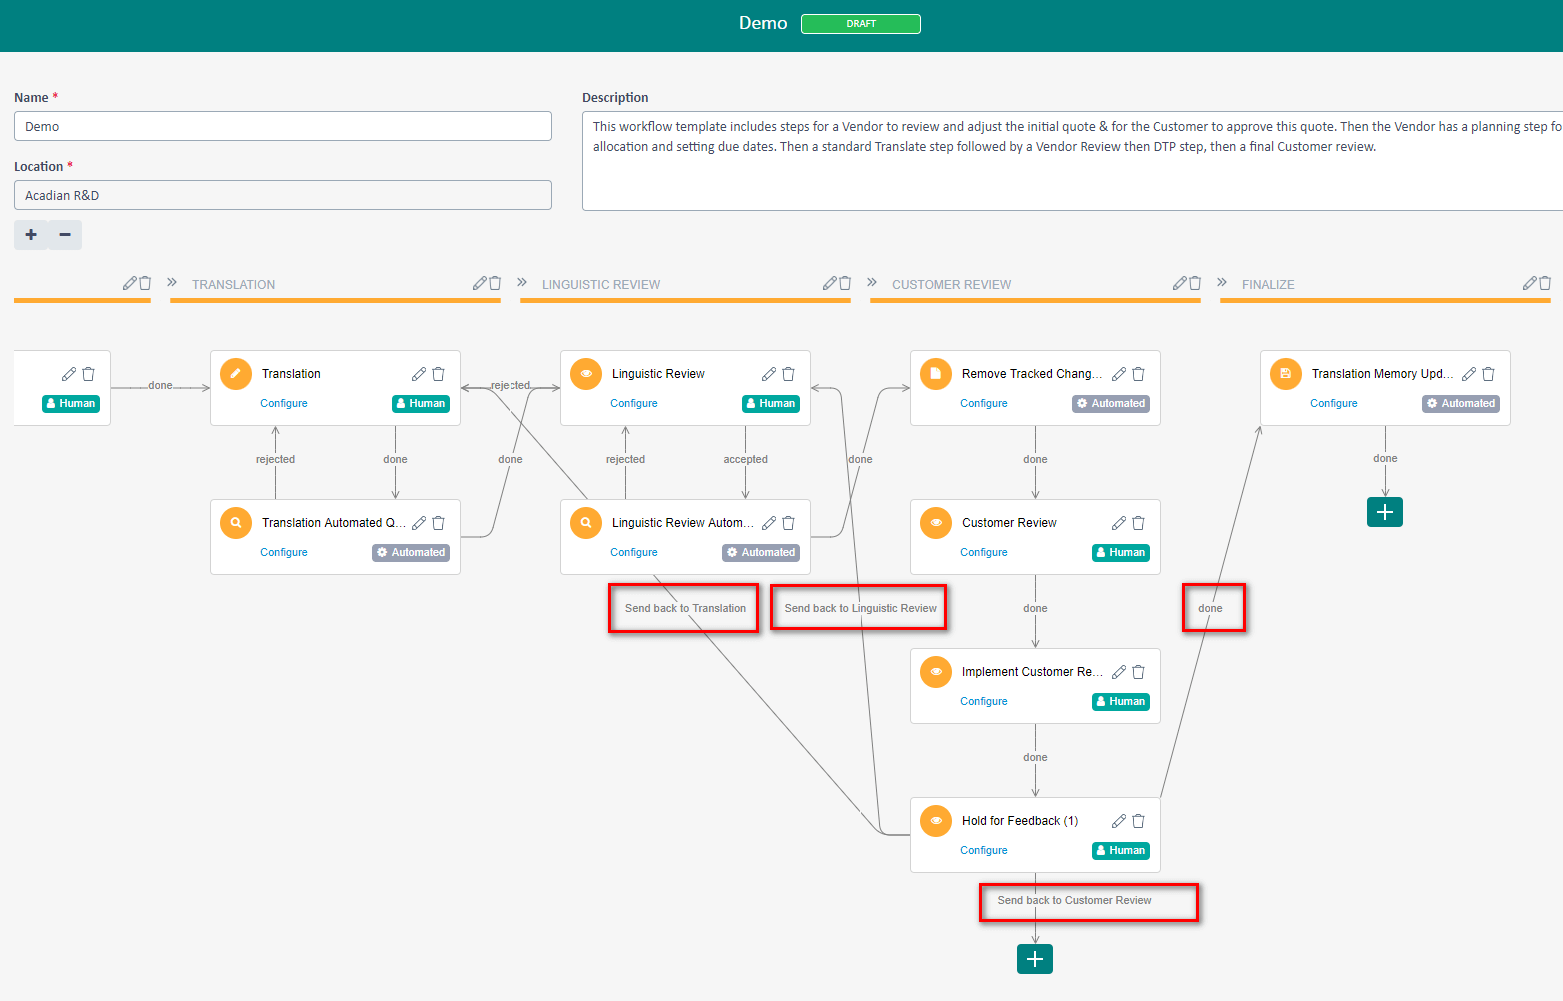 Screenshot showing multiple outcomes for human workflow tasks